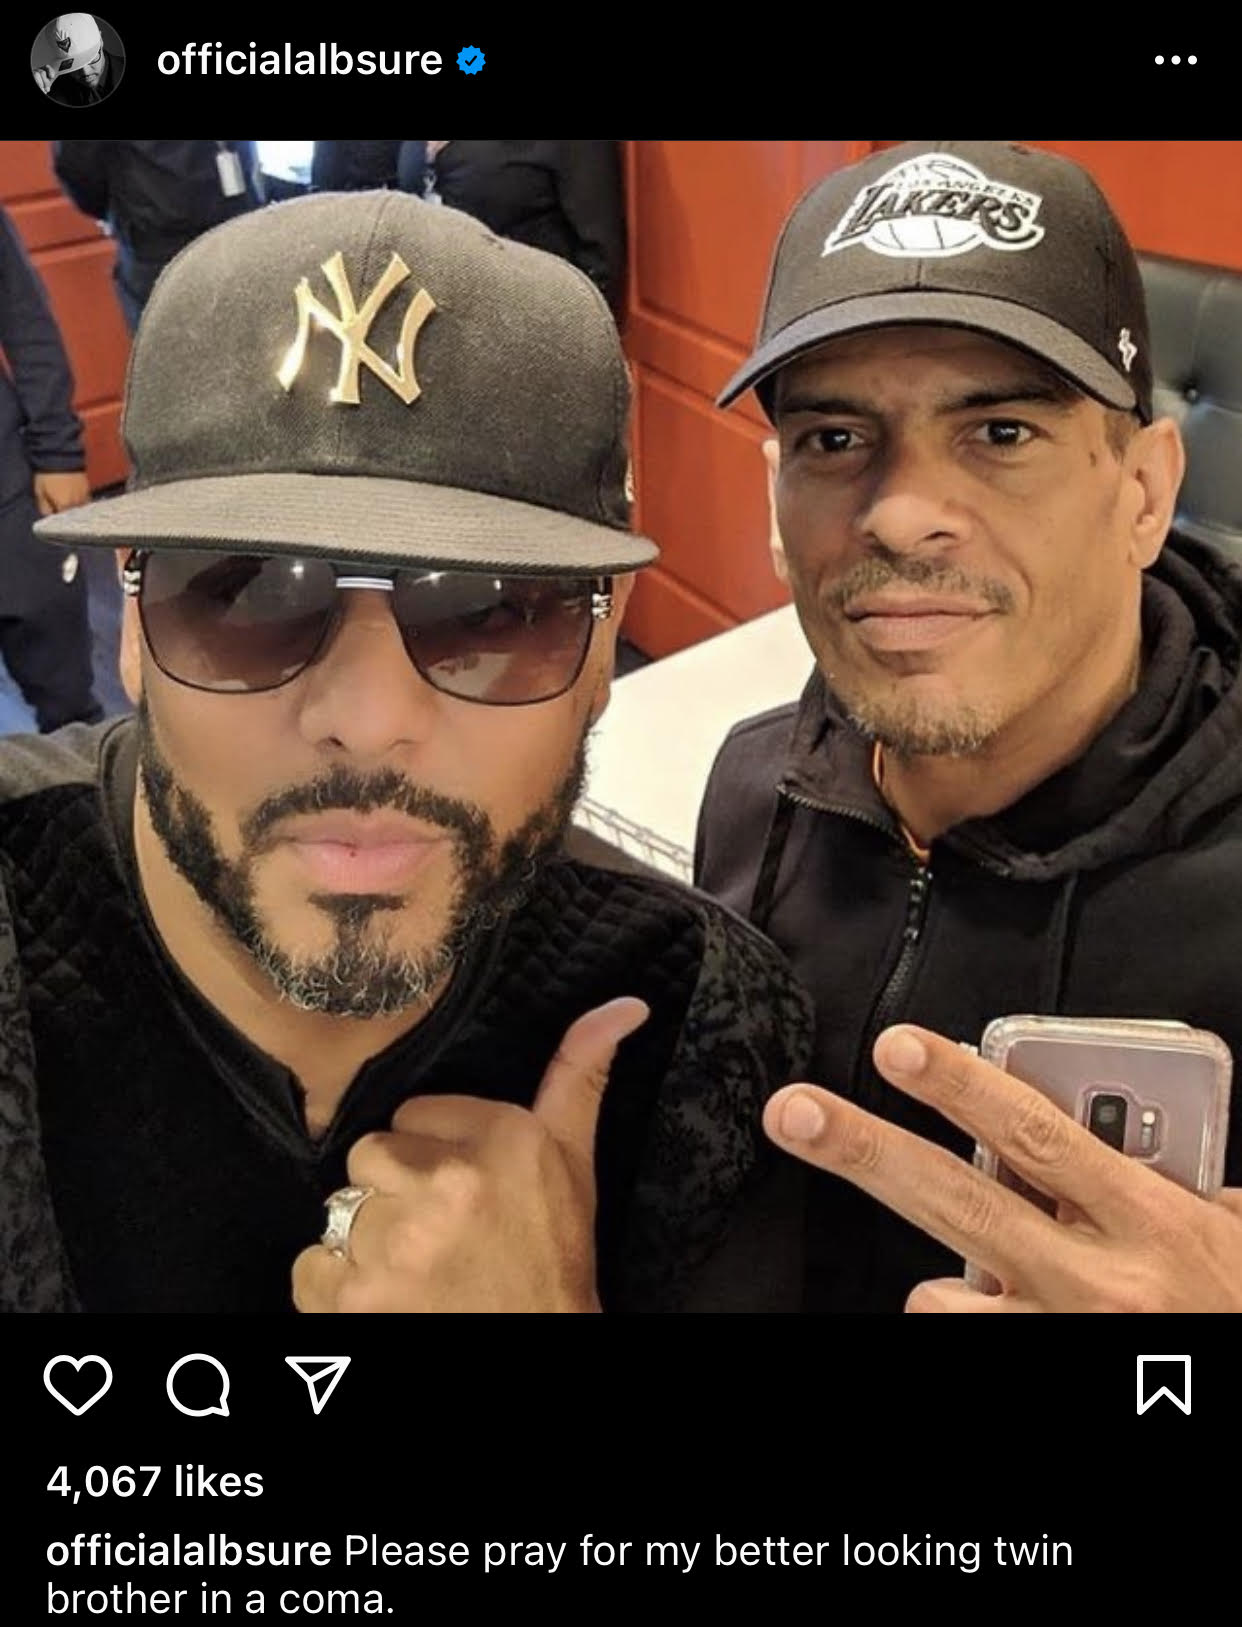 Update Singer Christopher Williams Is NOT In A Coma, Is In "Stable